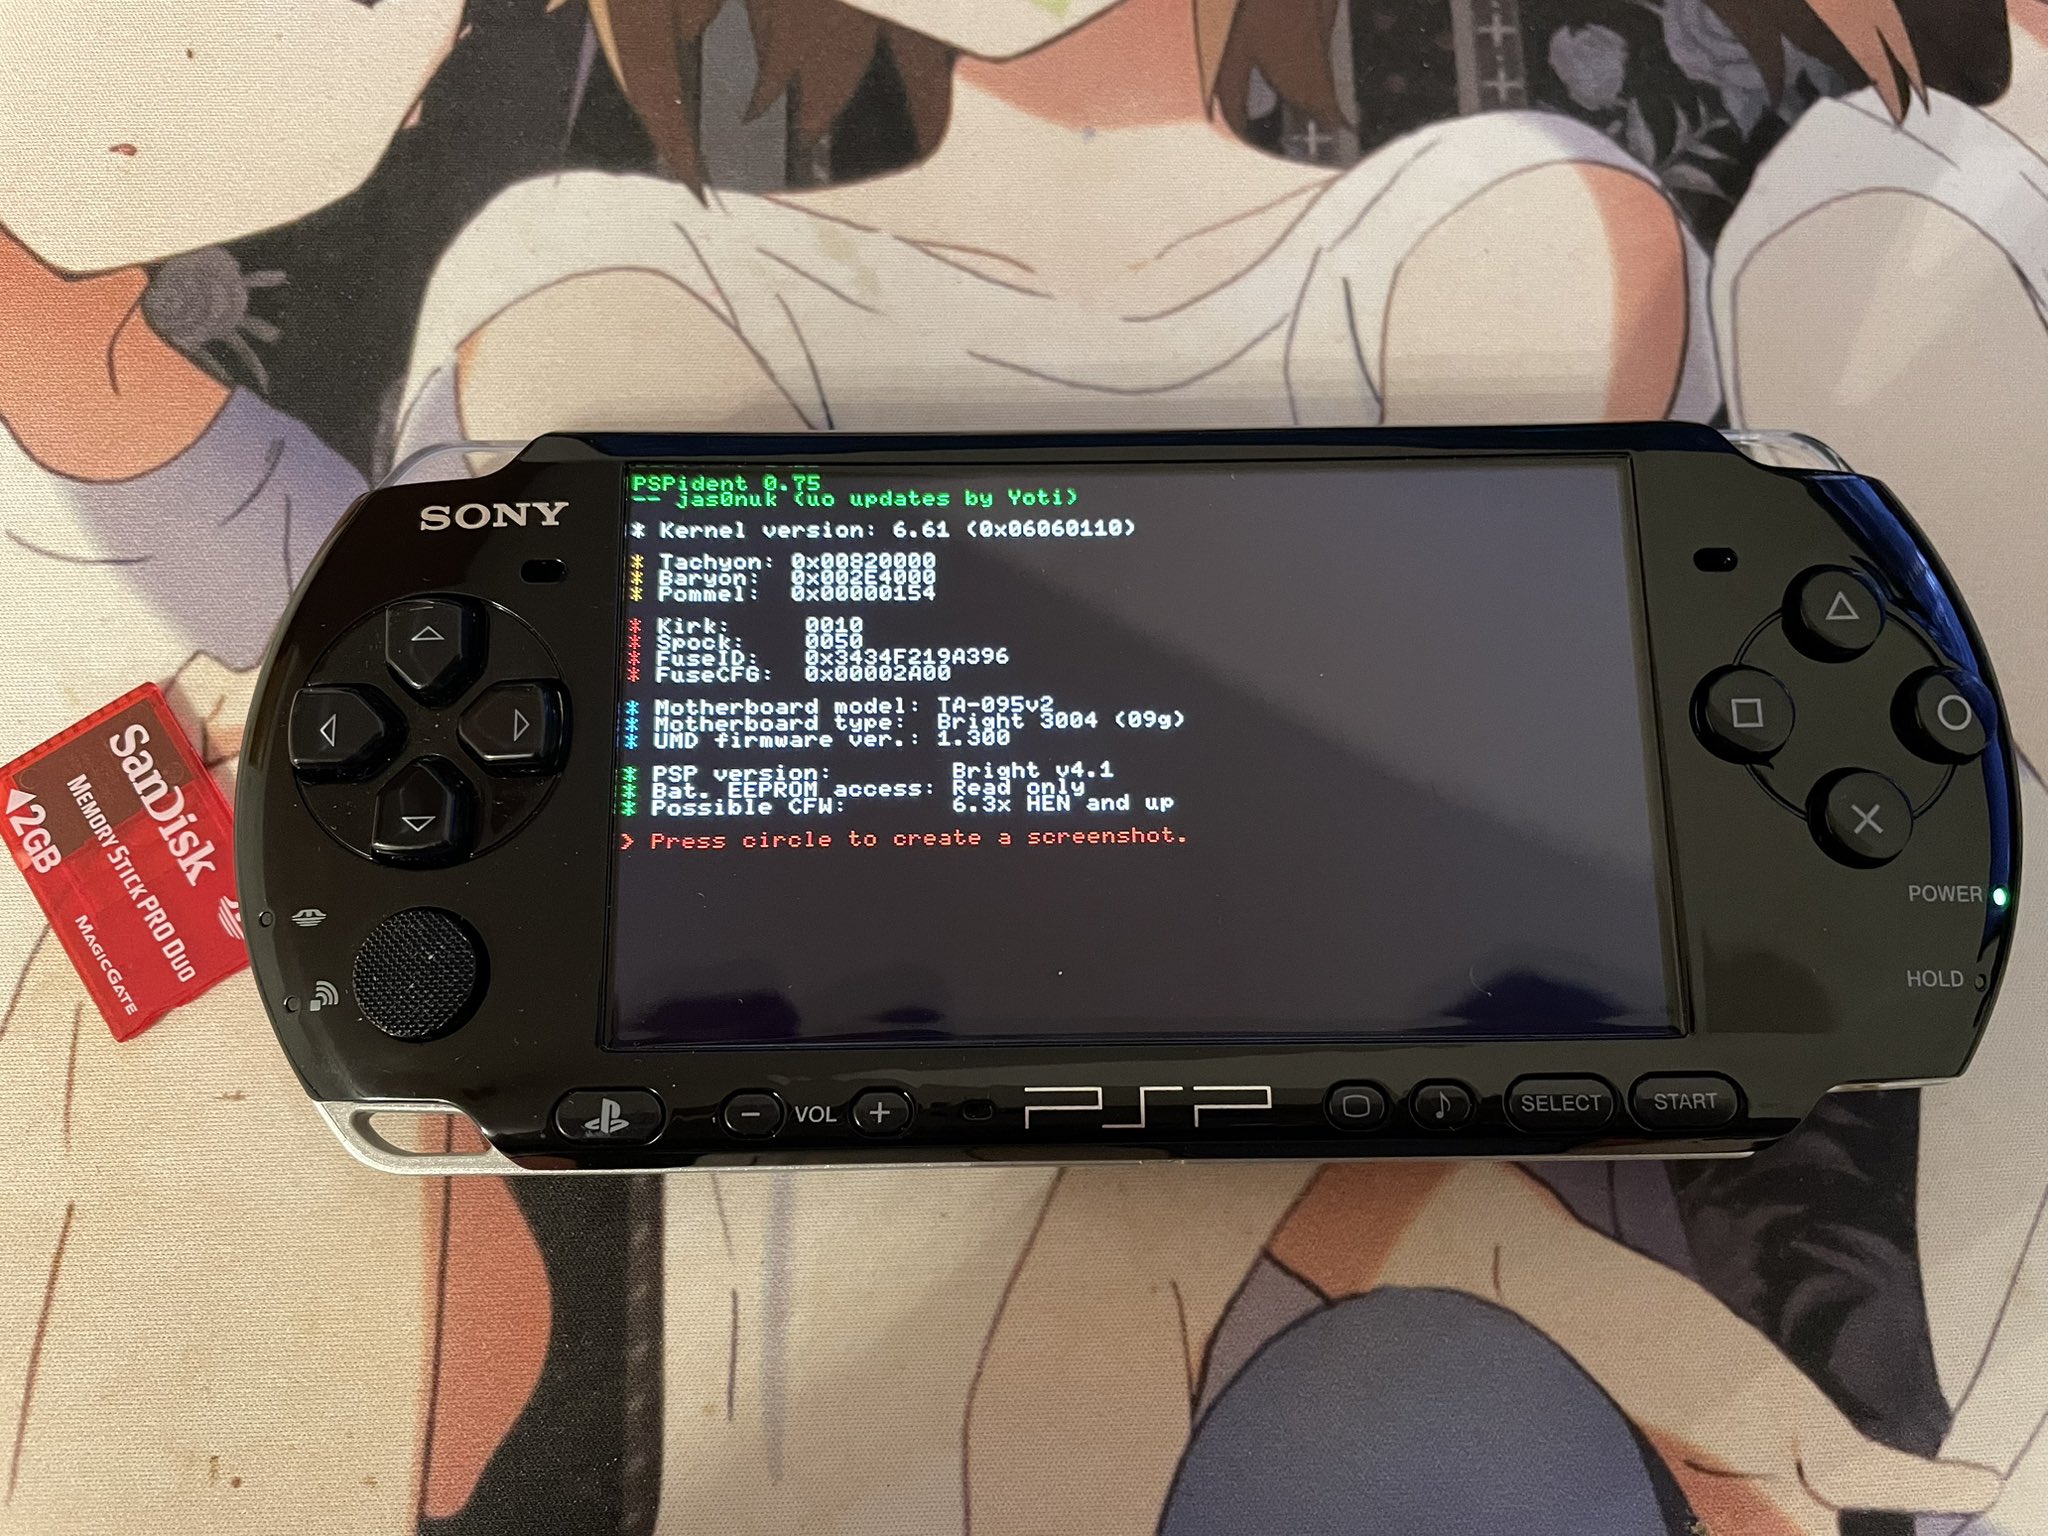 TheZett on Twitter: "There we go, PSP 3000 09g acquired :) The BaryonSweeper is working as expected, even a 09g 3000! https://t.co/e0U21V7TTK" / X